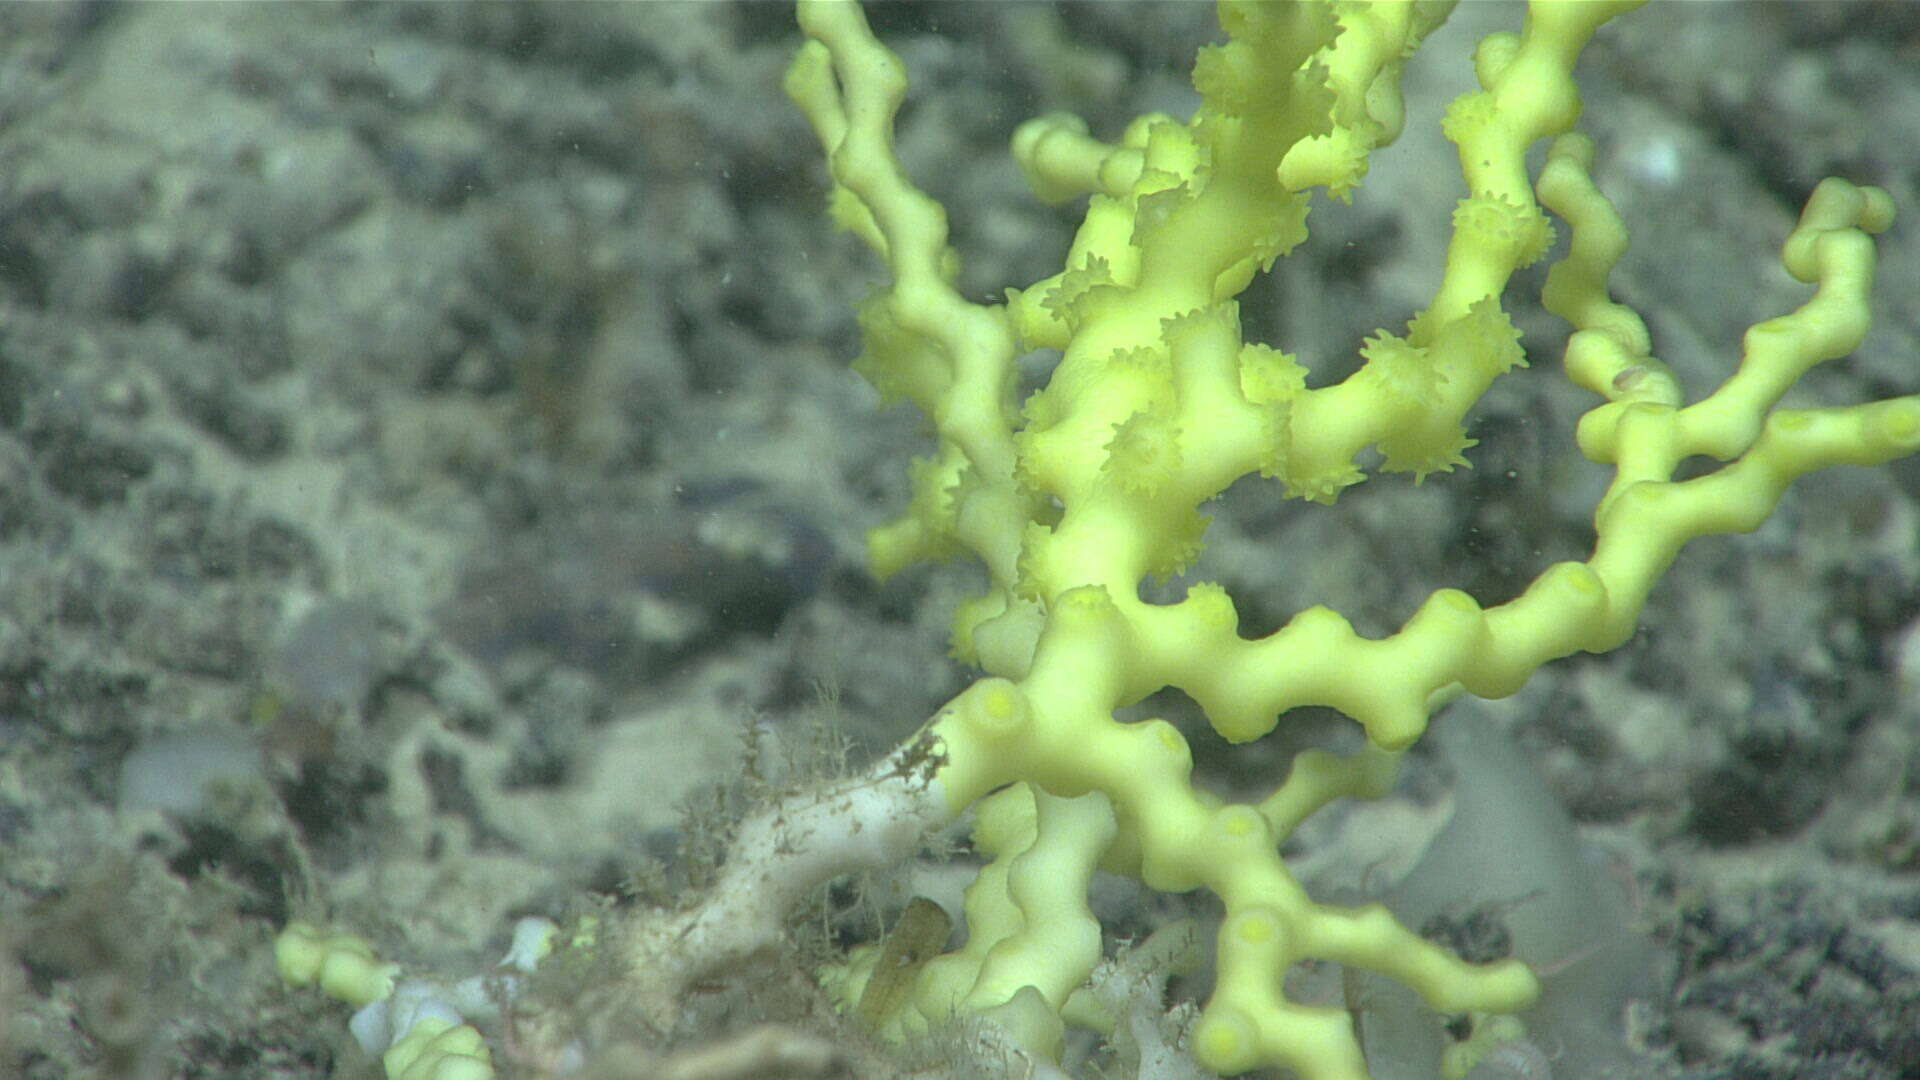 Image of deepwater stony coral